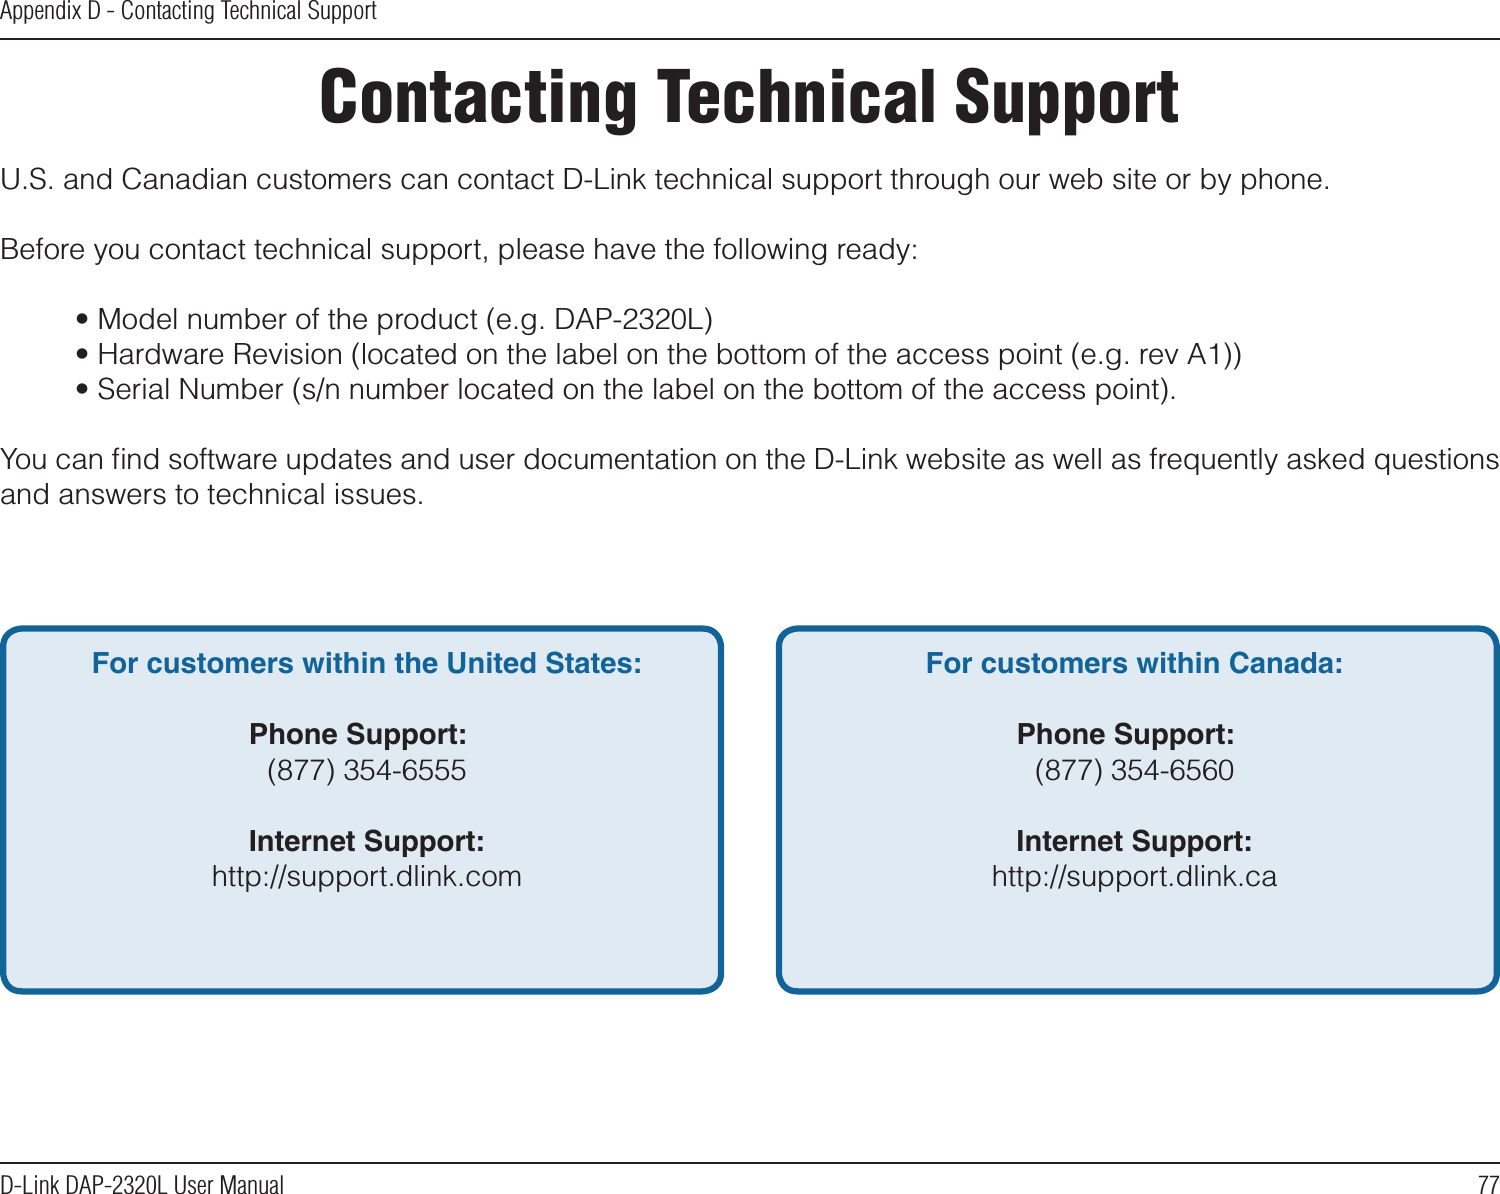 77D-Link DAP-2320L User ManualAppendix D - Contacting Technical SupportContacting Technical SupportU.S. and Canadian customers can contact D-Link technical support through our web site or by phone.Before you contact technical support, please have the following ready:  • Model number of the product (e.g. DAP-2320L)  • Hardware Revision (located on the label on the bottom of the access point (e.g. rev A1))  • Serial Number (s/n number located on the label on the bottom of the access point). You can ﬁnd software updates and user documentation on the D-Link website as well as frequently asked questions and answers to technical issues.For customers within the United States: Phone Support:  (877) 354-6555 Internet Support:  http://support.dlink.com For customers within Canada: Phone Support:  (877) 354-6560  Internet Support:  http://support.dlink.ca 